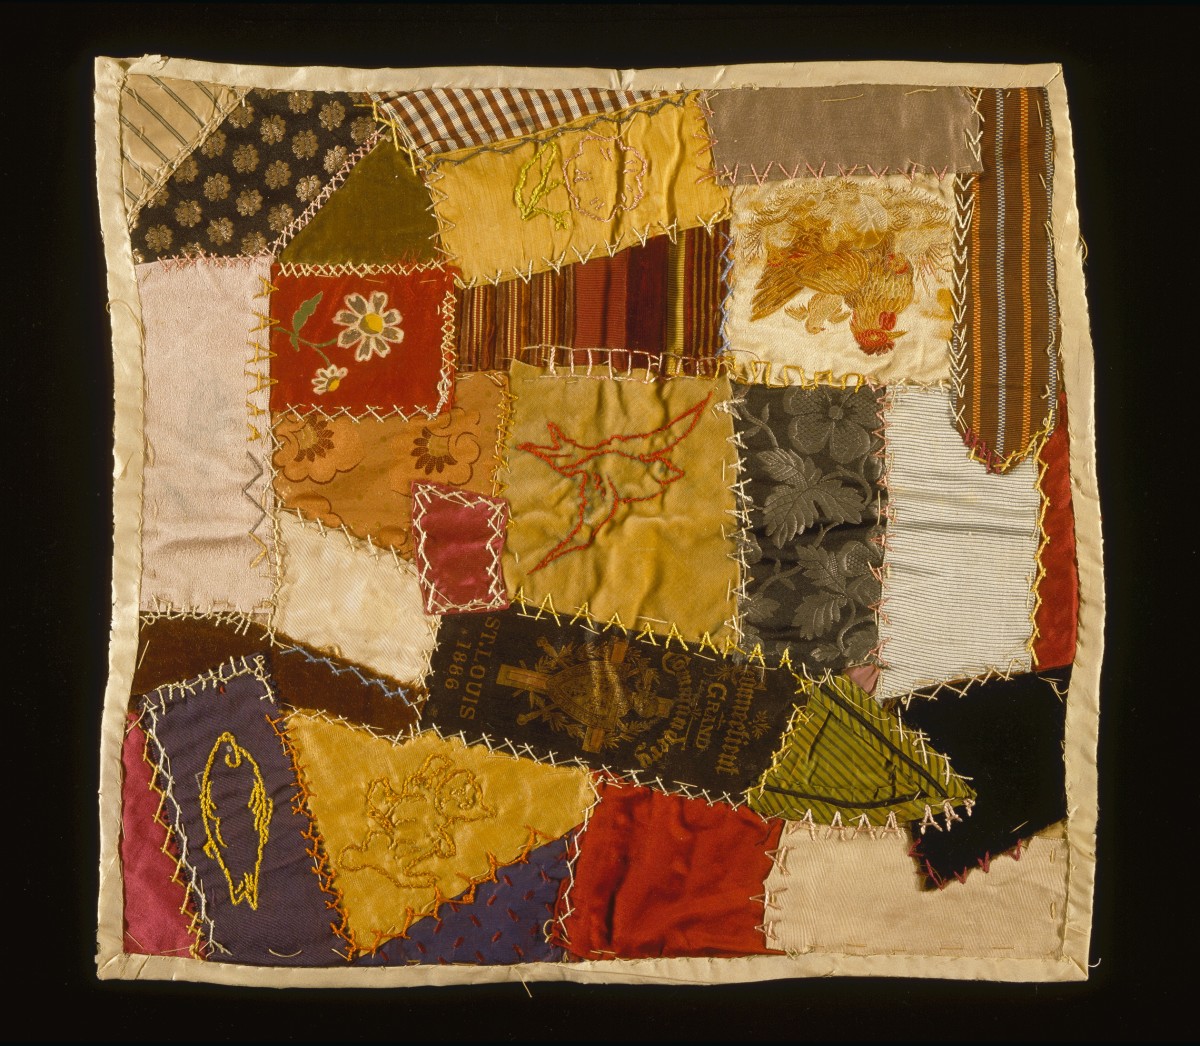 An example of a Crazy quilt